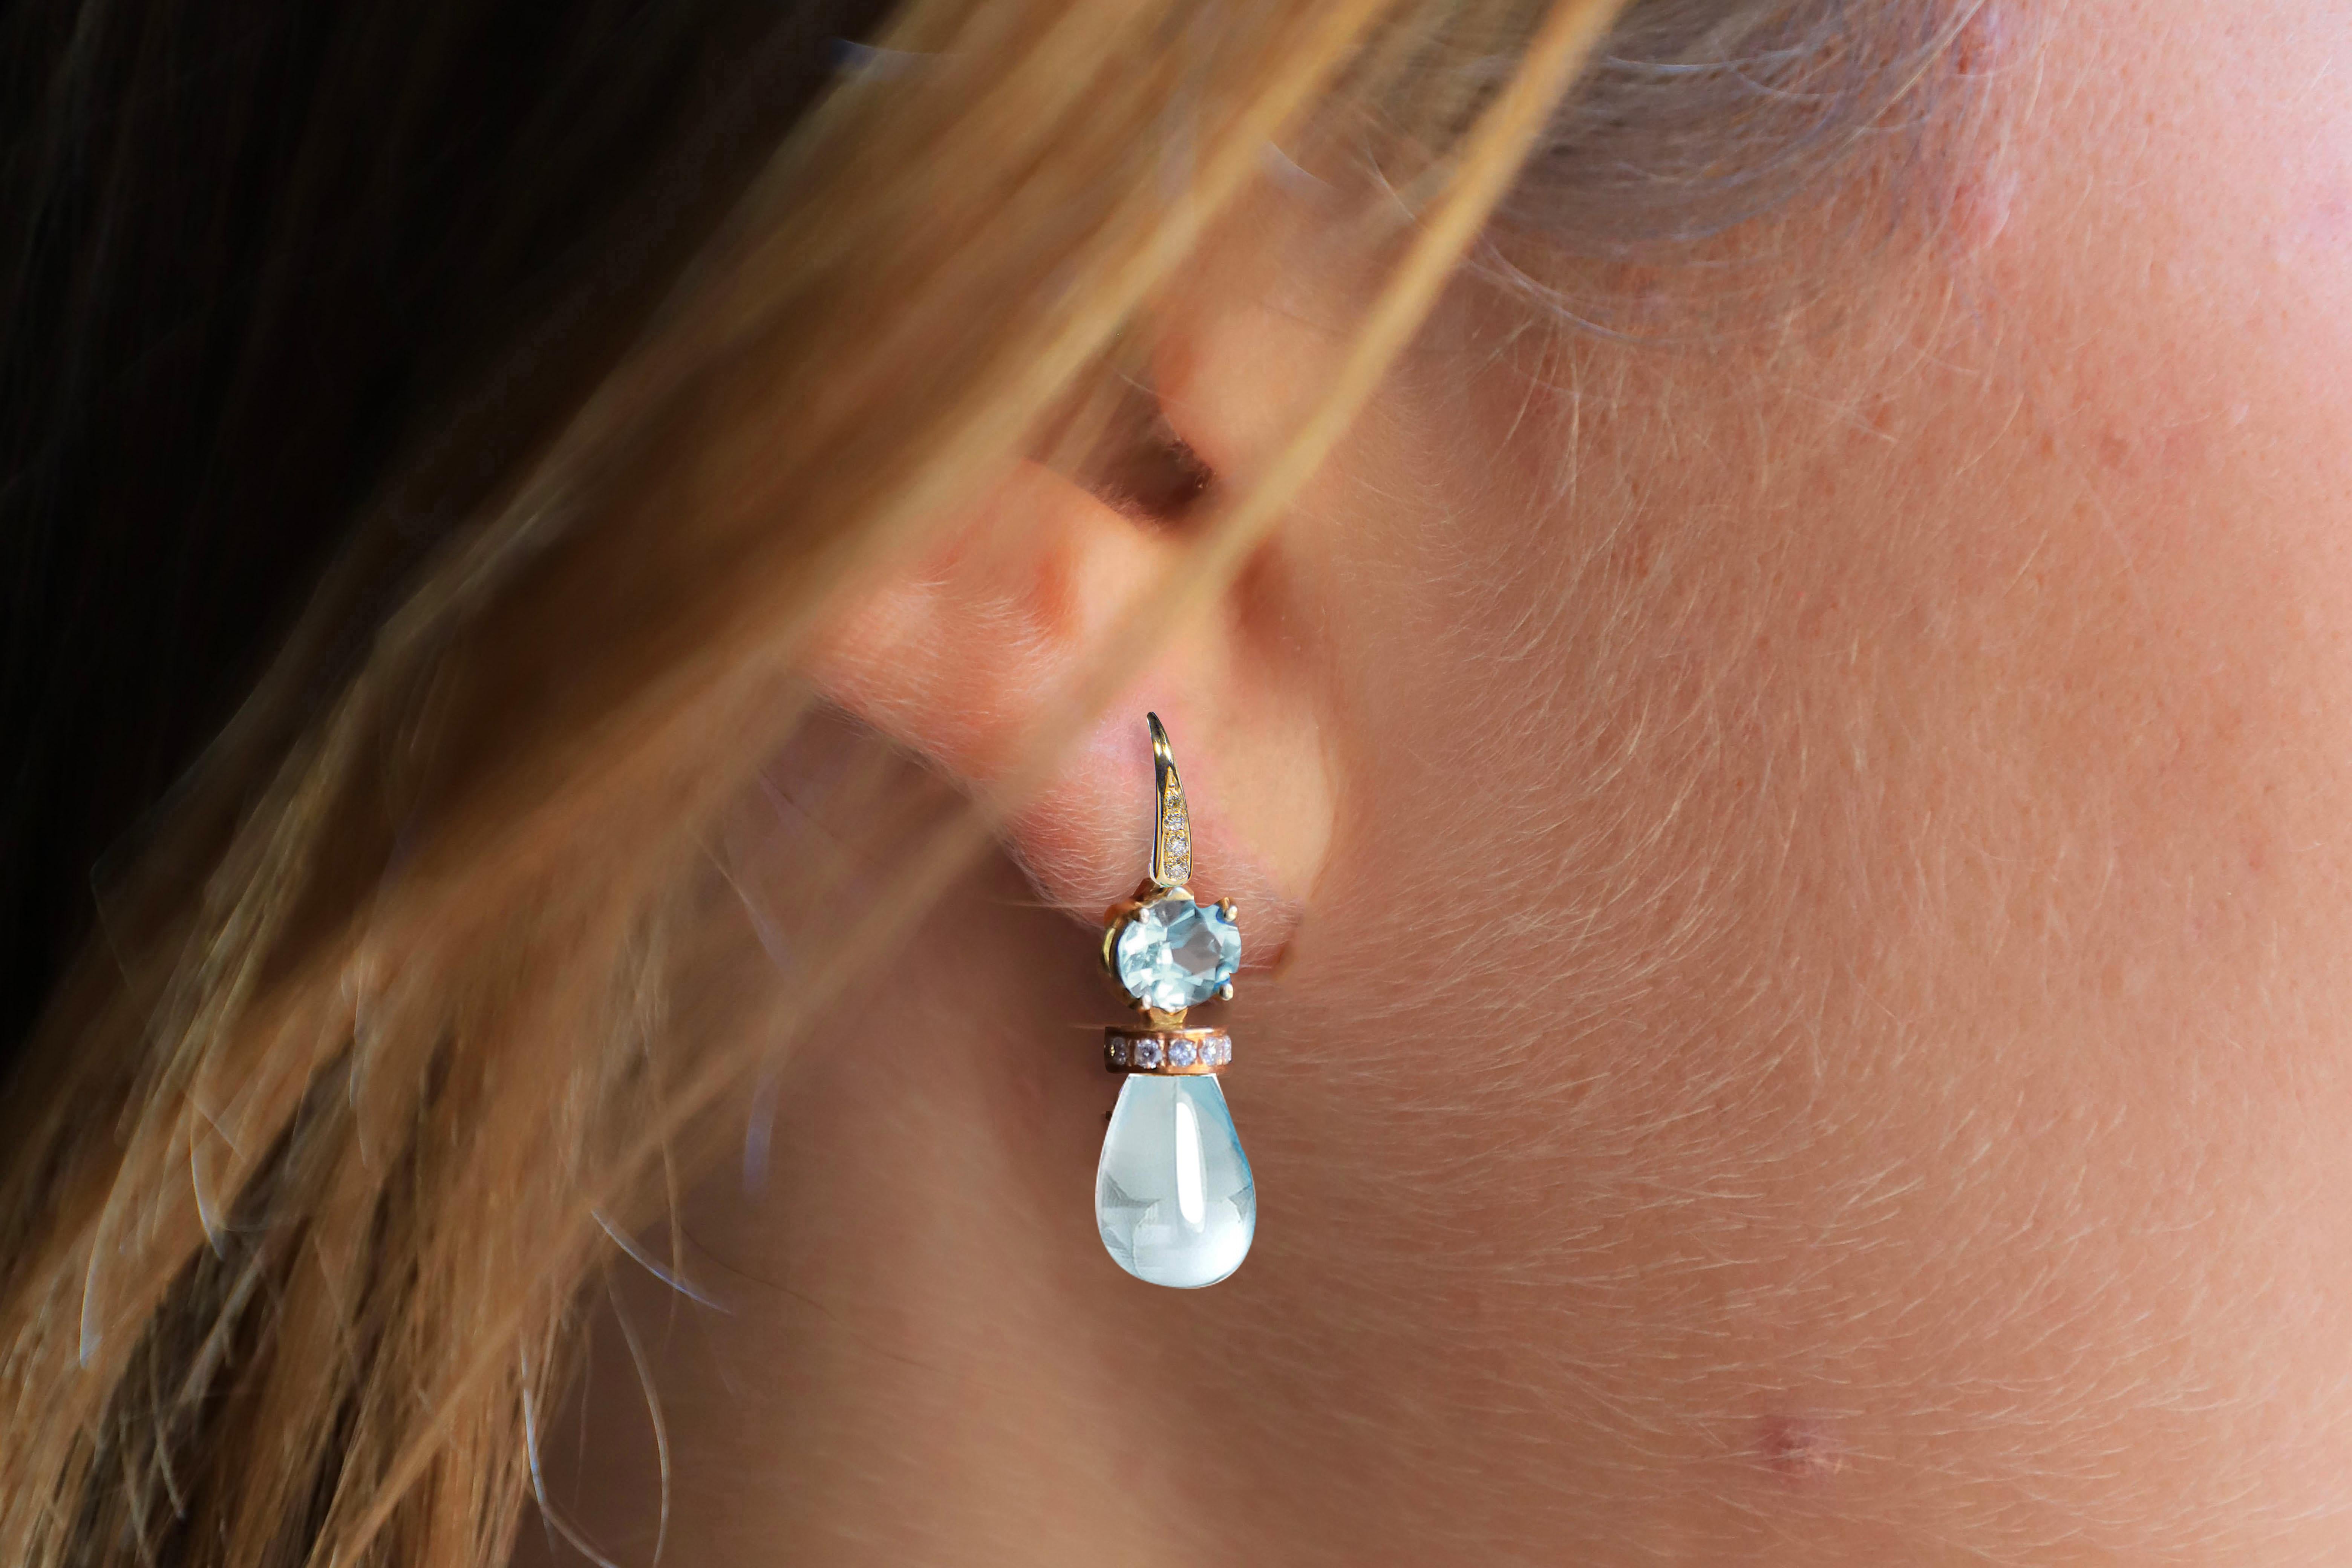 Introducing Rossella Ugolini's 18K Yellow Gold Earrings a masterful blend of timeless elegance and captivating gemstones. The focal point of these exquisite earrings is the mesmerizing Aquamarine duo, featuring an oval-cut and a pear-cut gem, each